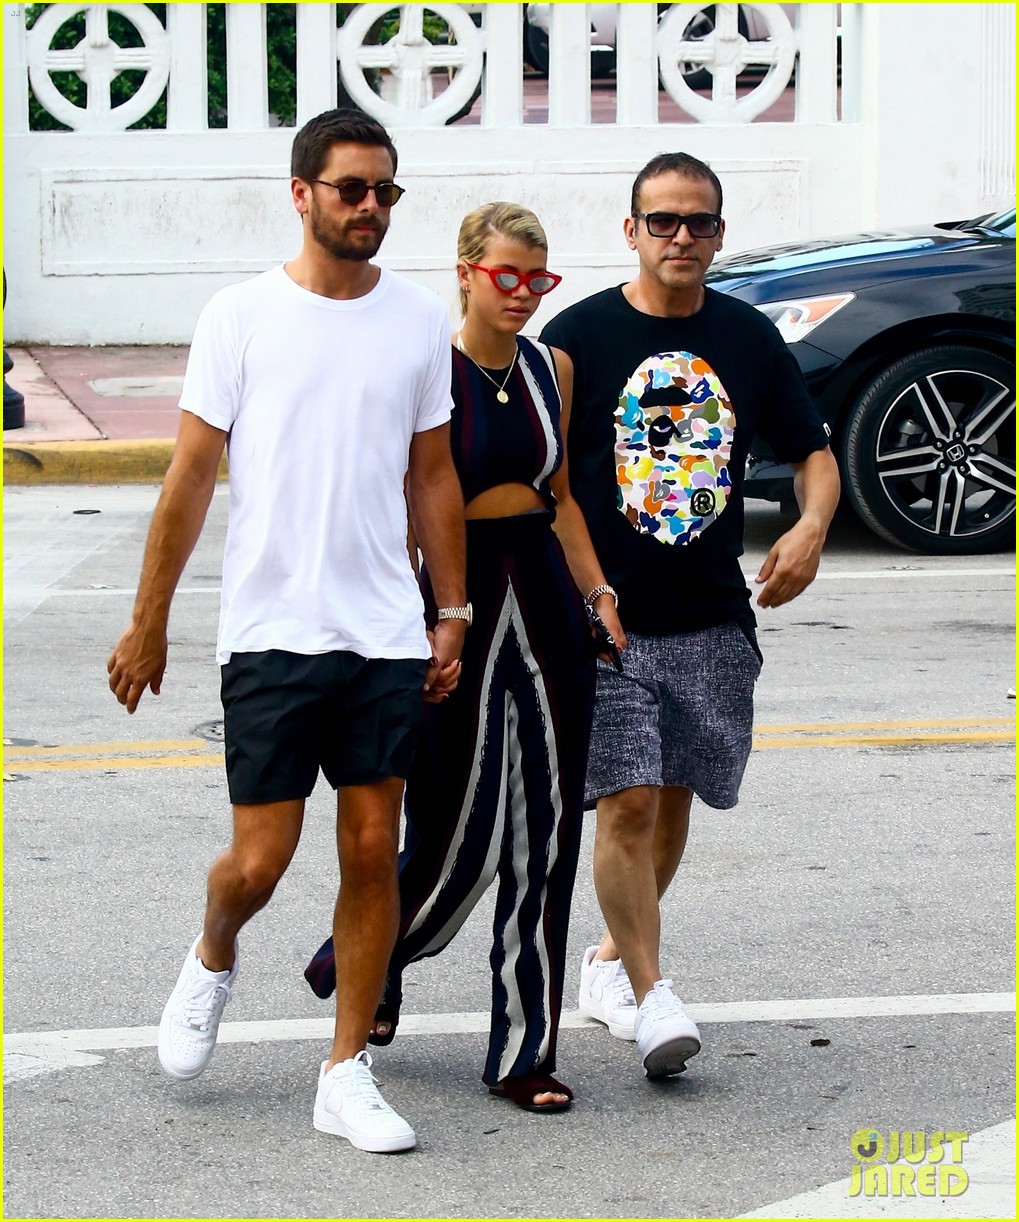 scott disick sofia richie continue pda filled vacation 09